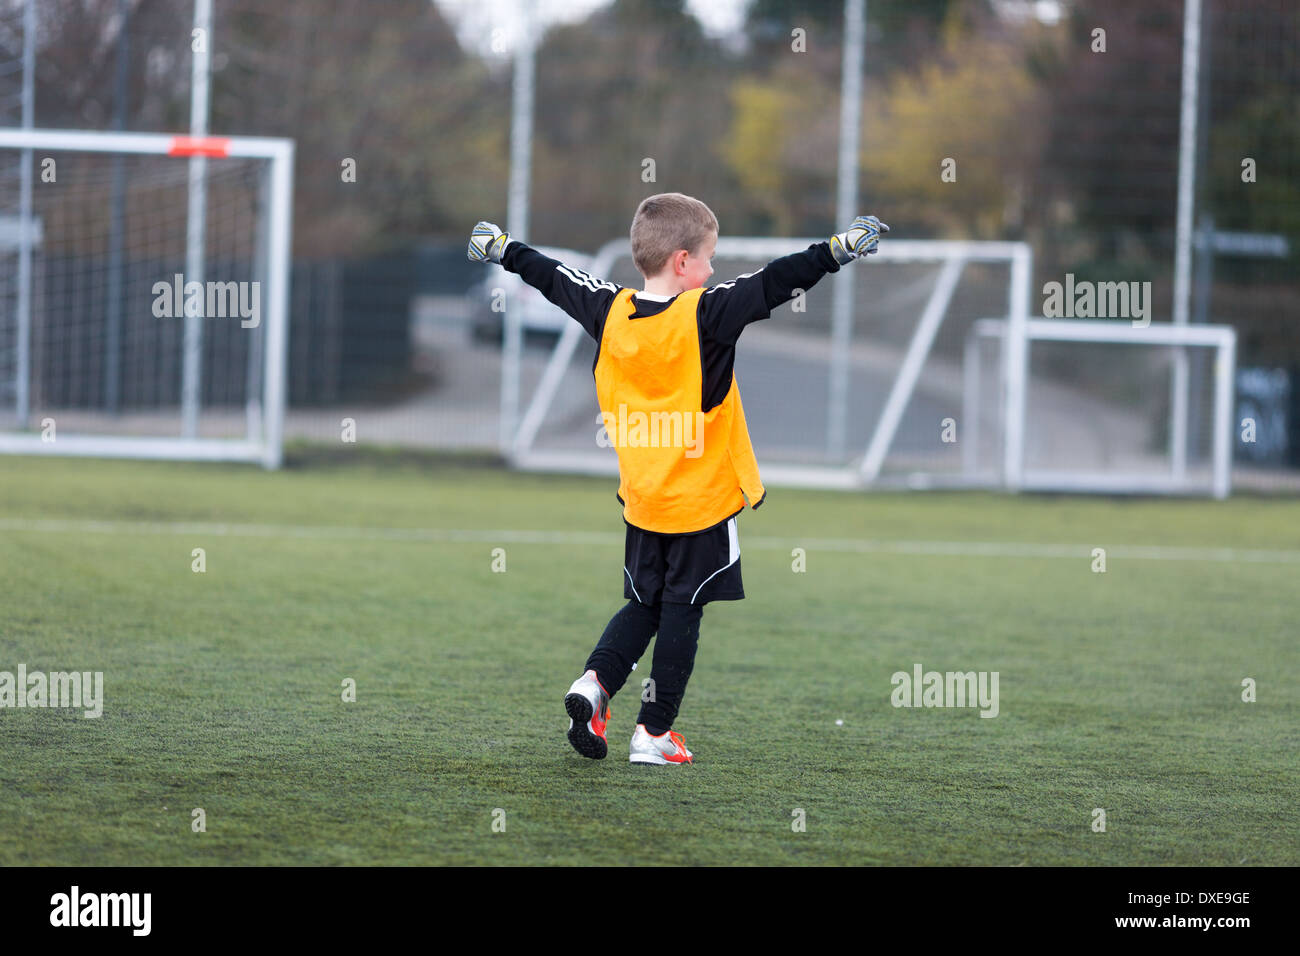 Young goal keeper celebrating a goal scored by his team. Stock Photo